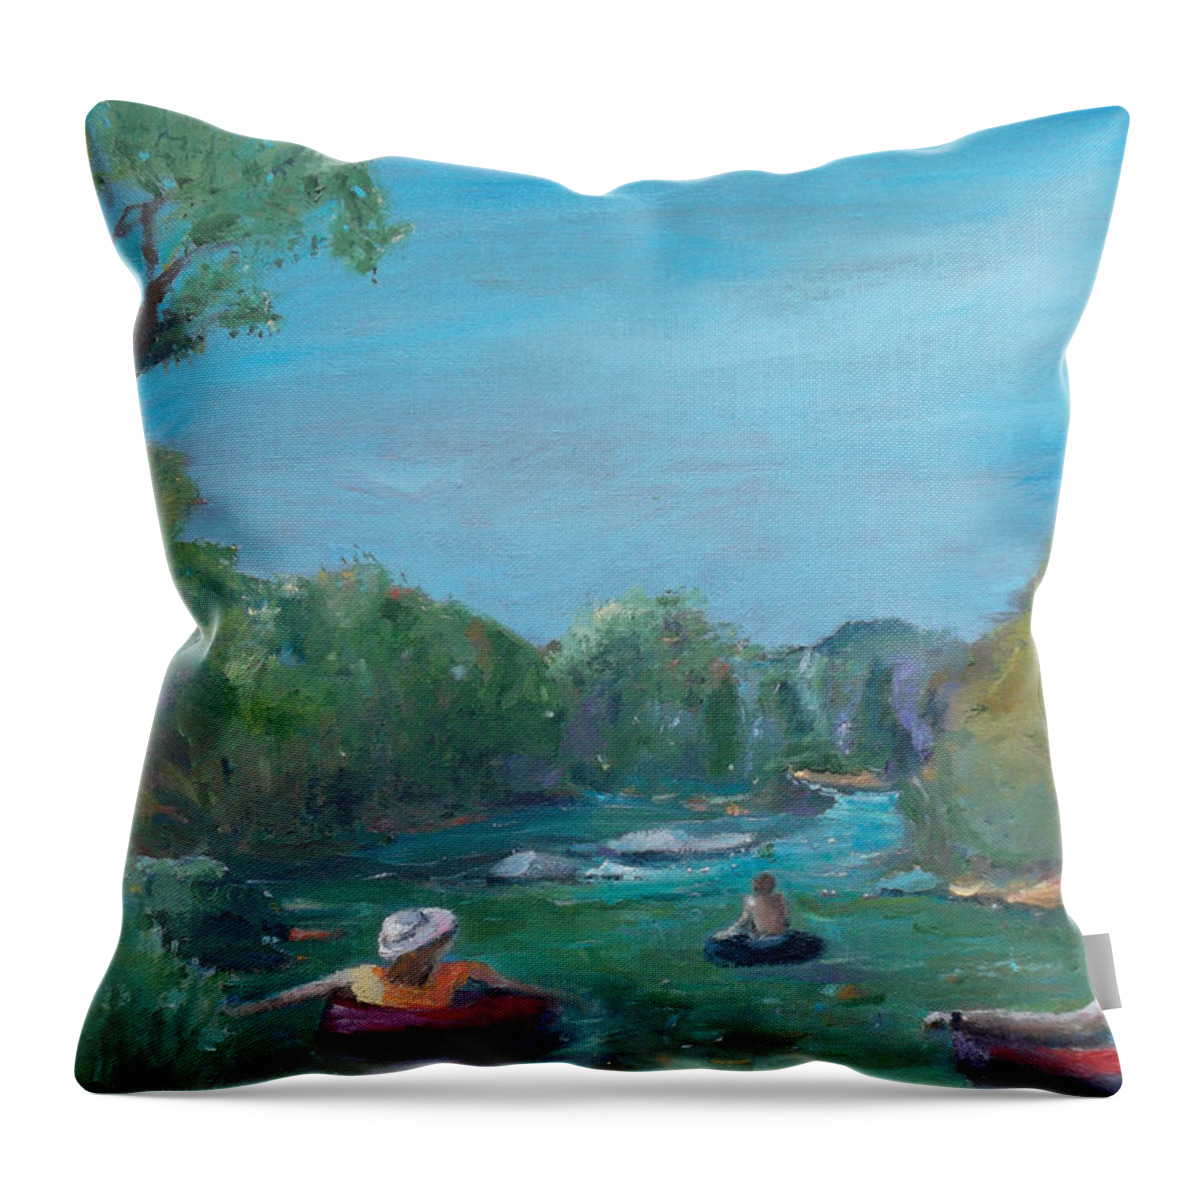 River Throw Pillow featuring the painting Summertime Float by Susan Esbensen